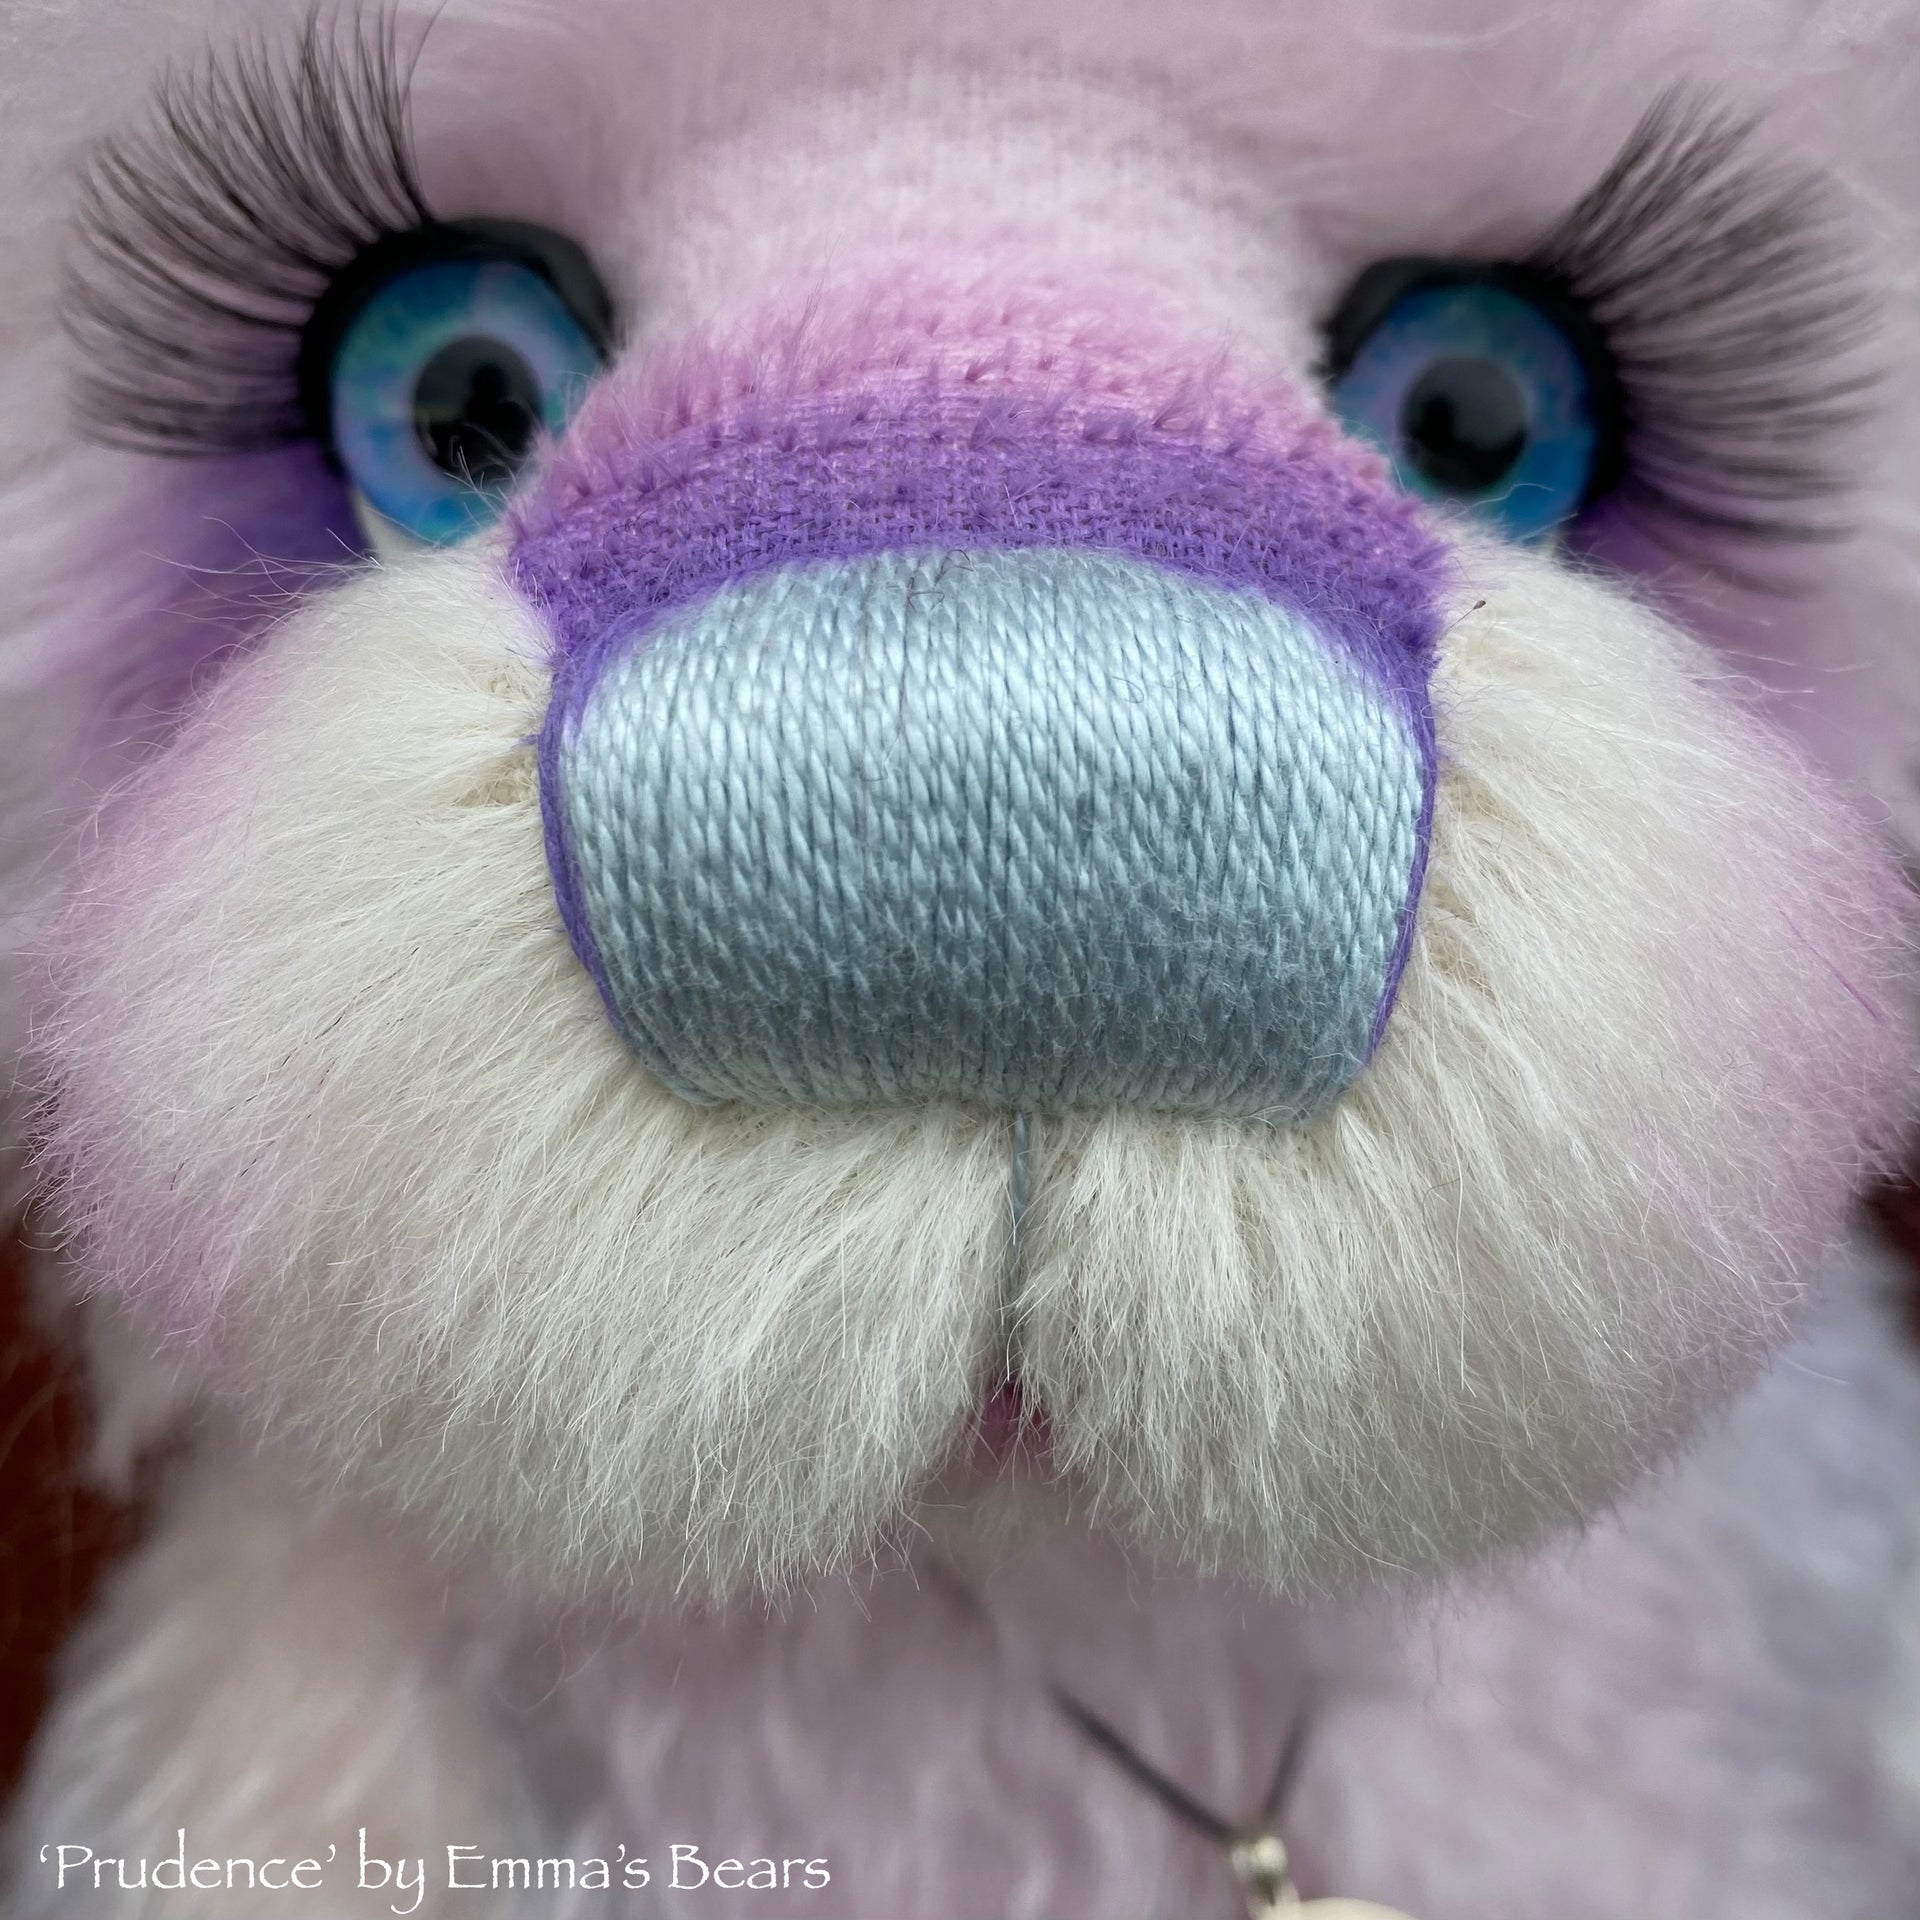 Prudence - 16" SPECIAL 25th Anniversary Collection Hand-dyed mohair Artist Bear by Emmas Bears - OOAK